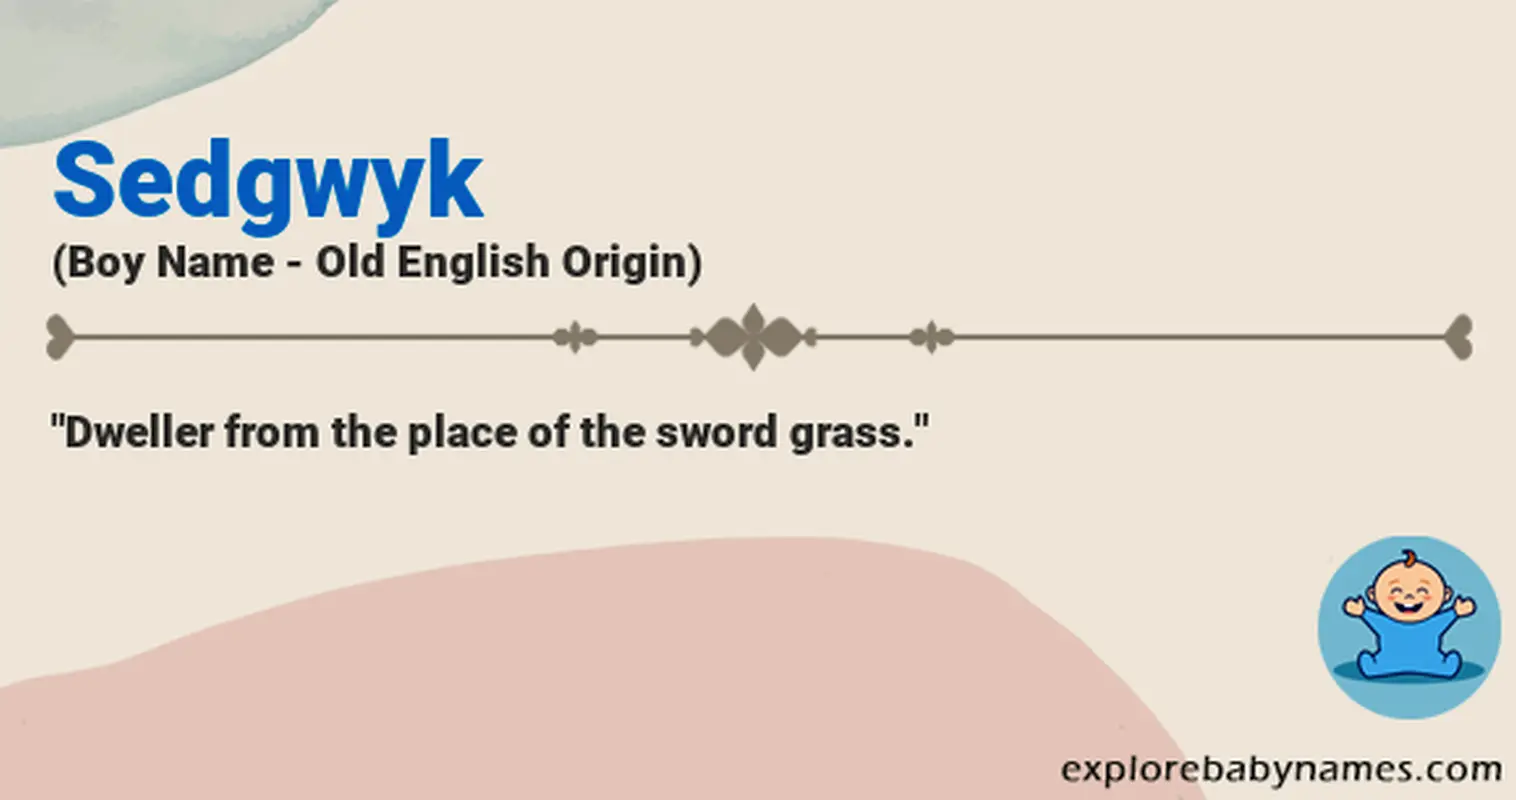 Meaning of Sedgwyk